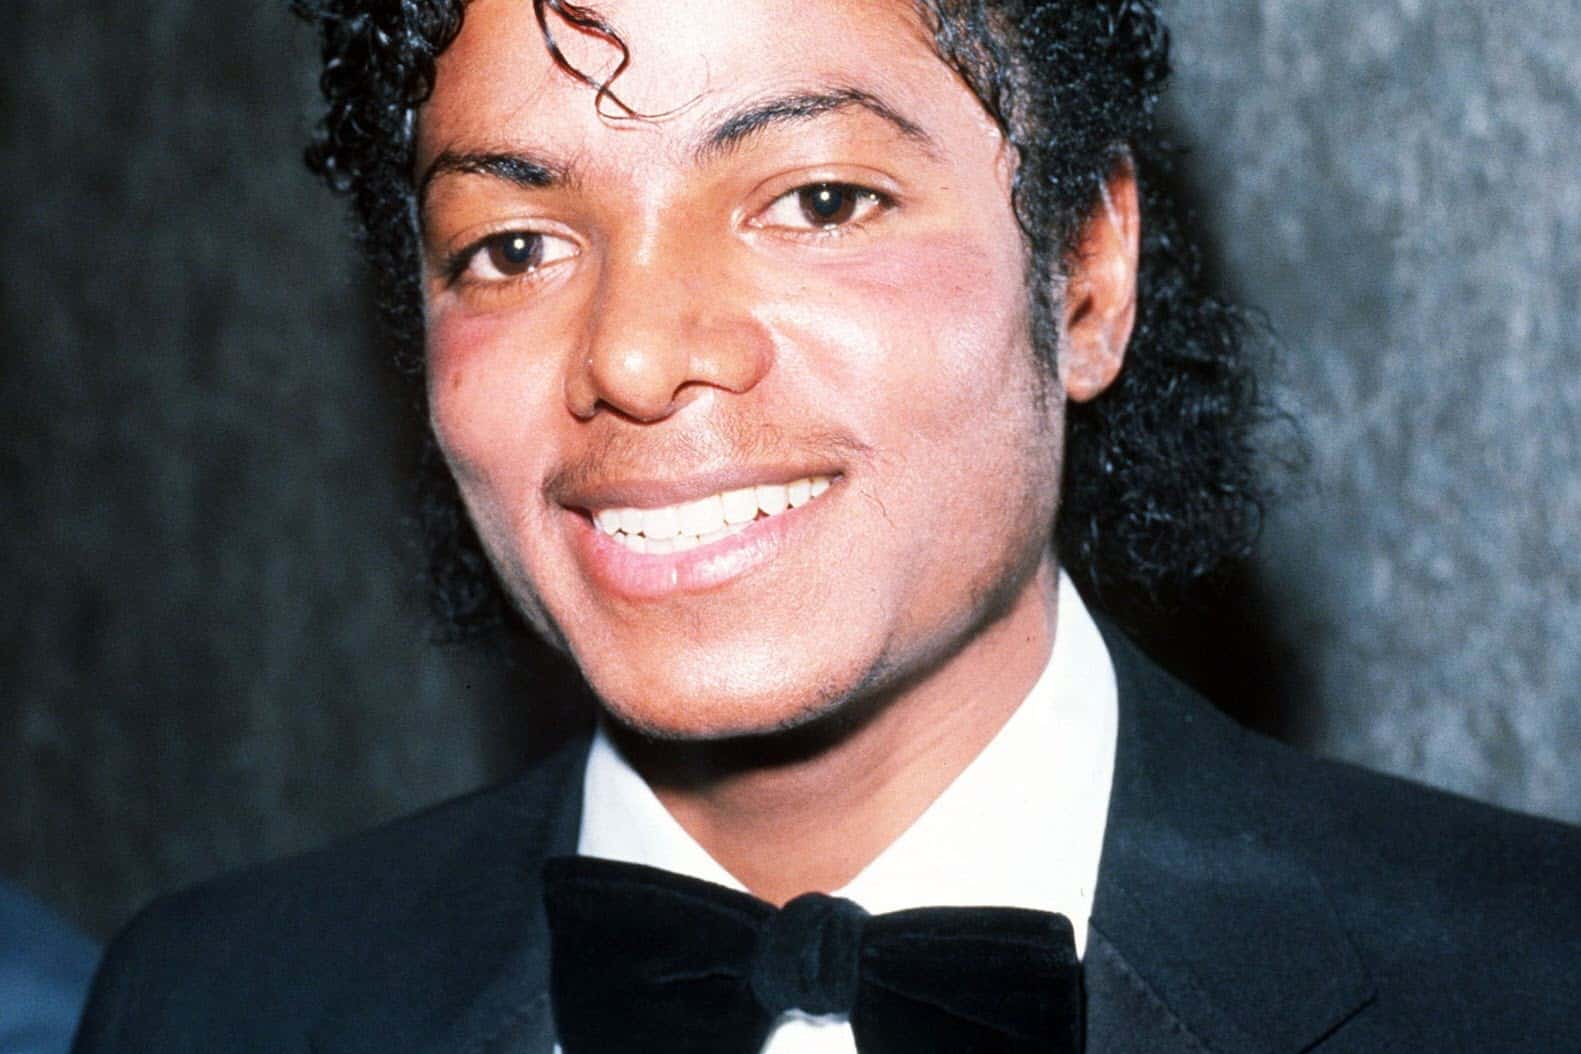 Watch Michael Jackson's incredible transformation throughout the years